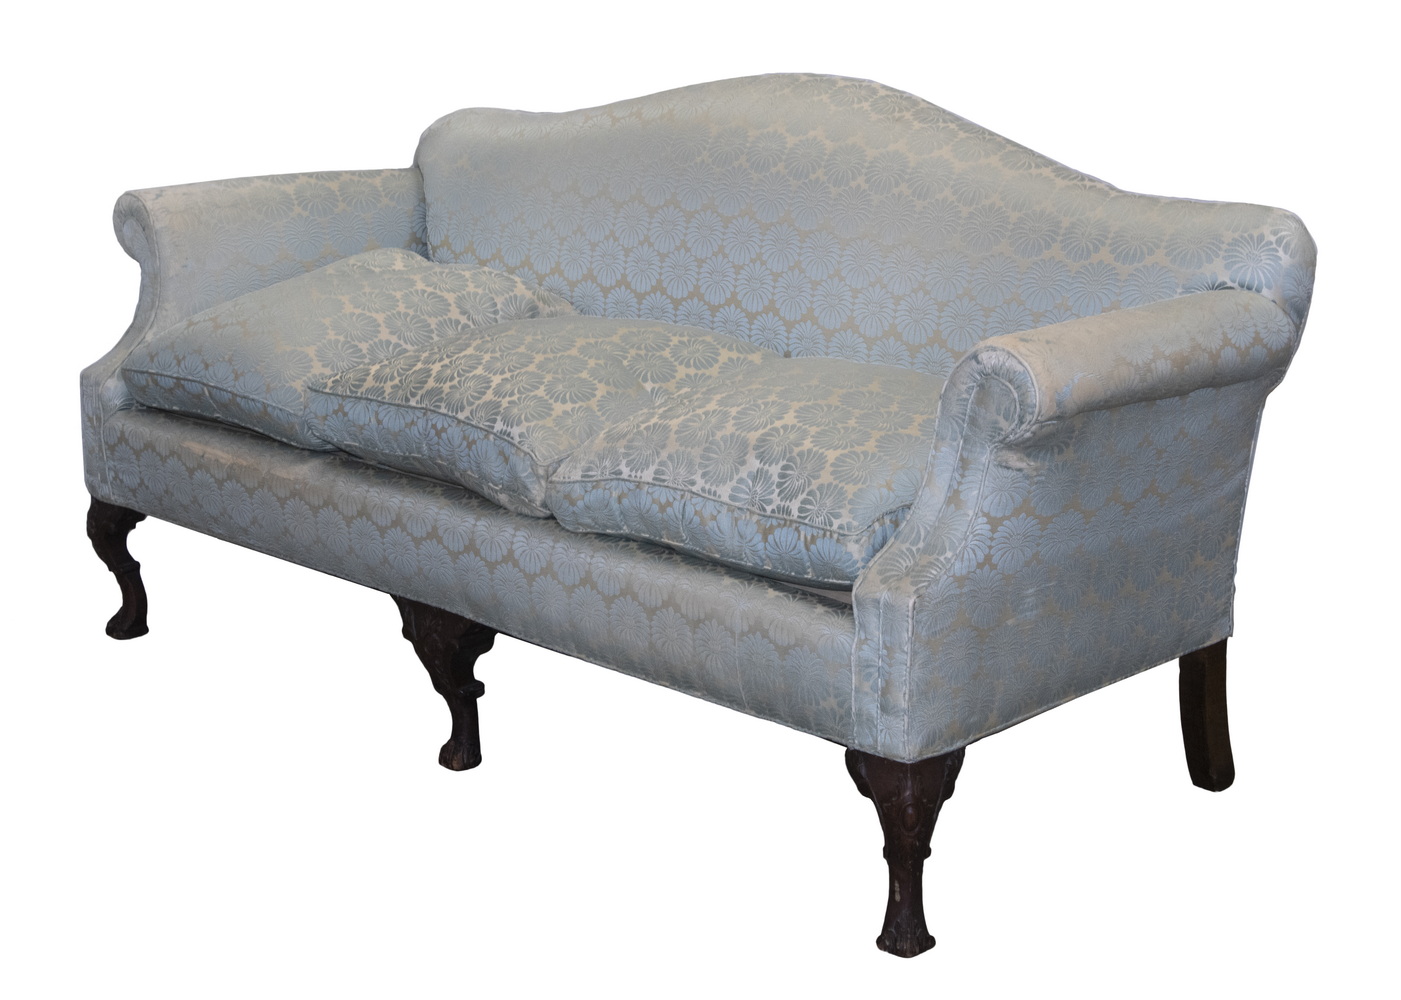 CHIPPENDALE STYLE SOFA Camel Back